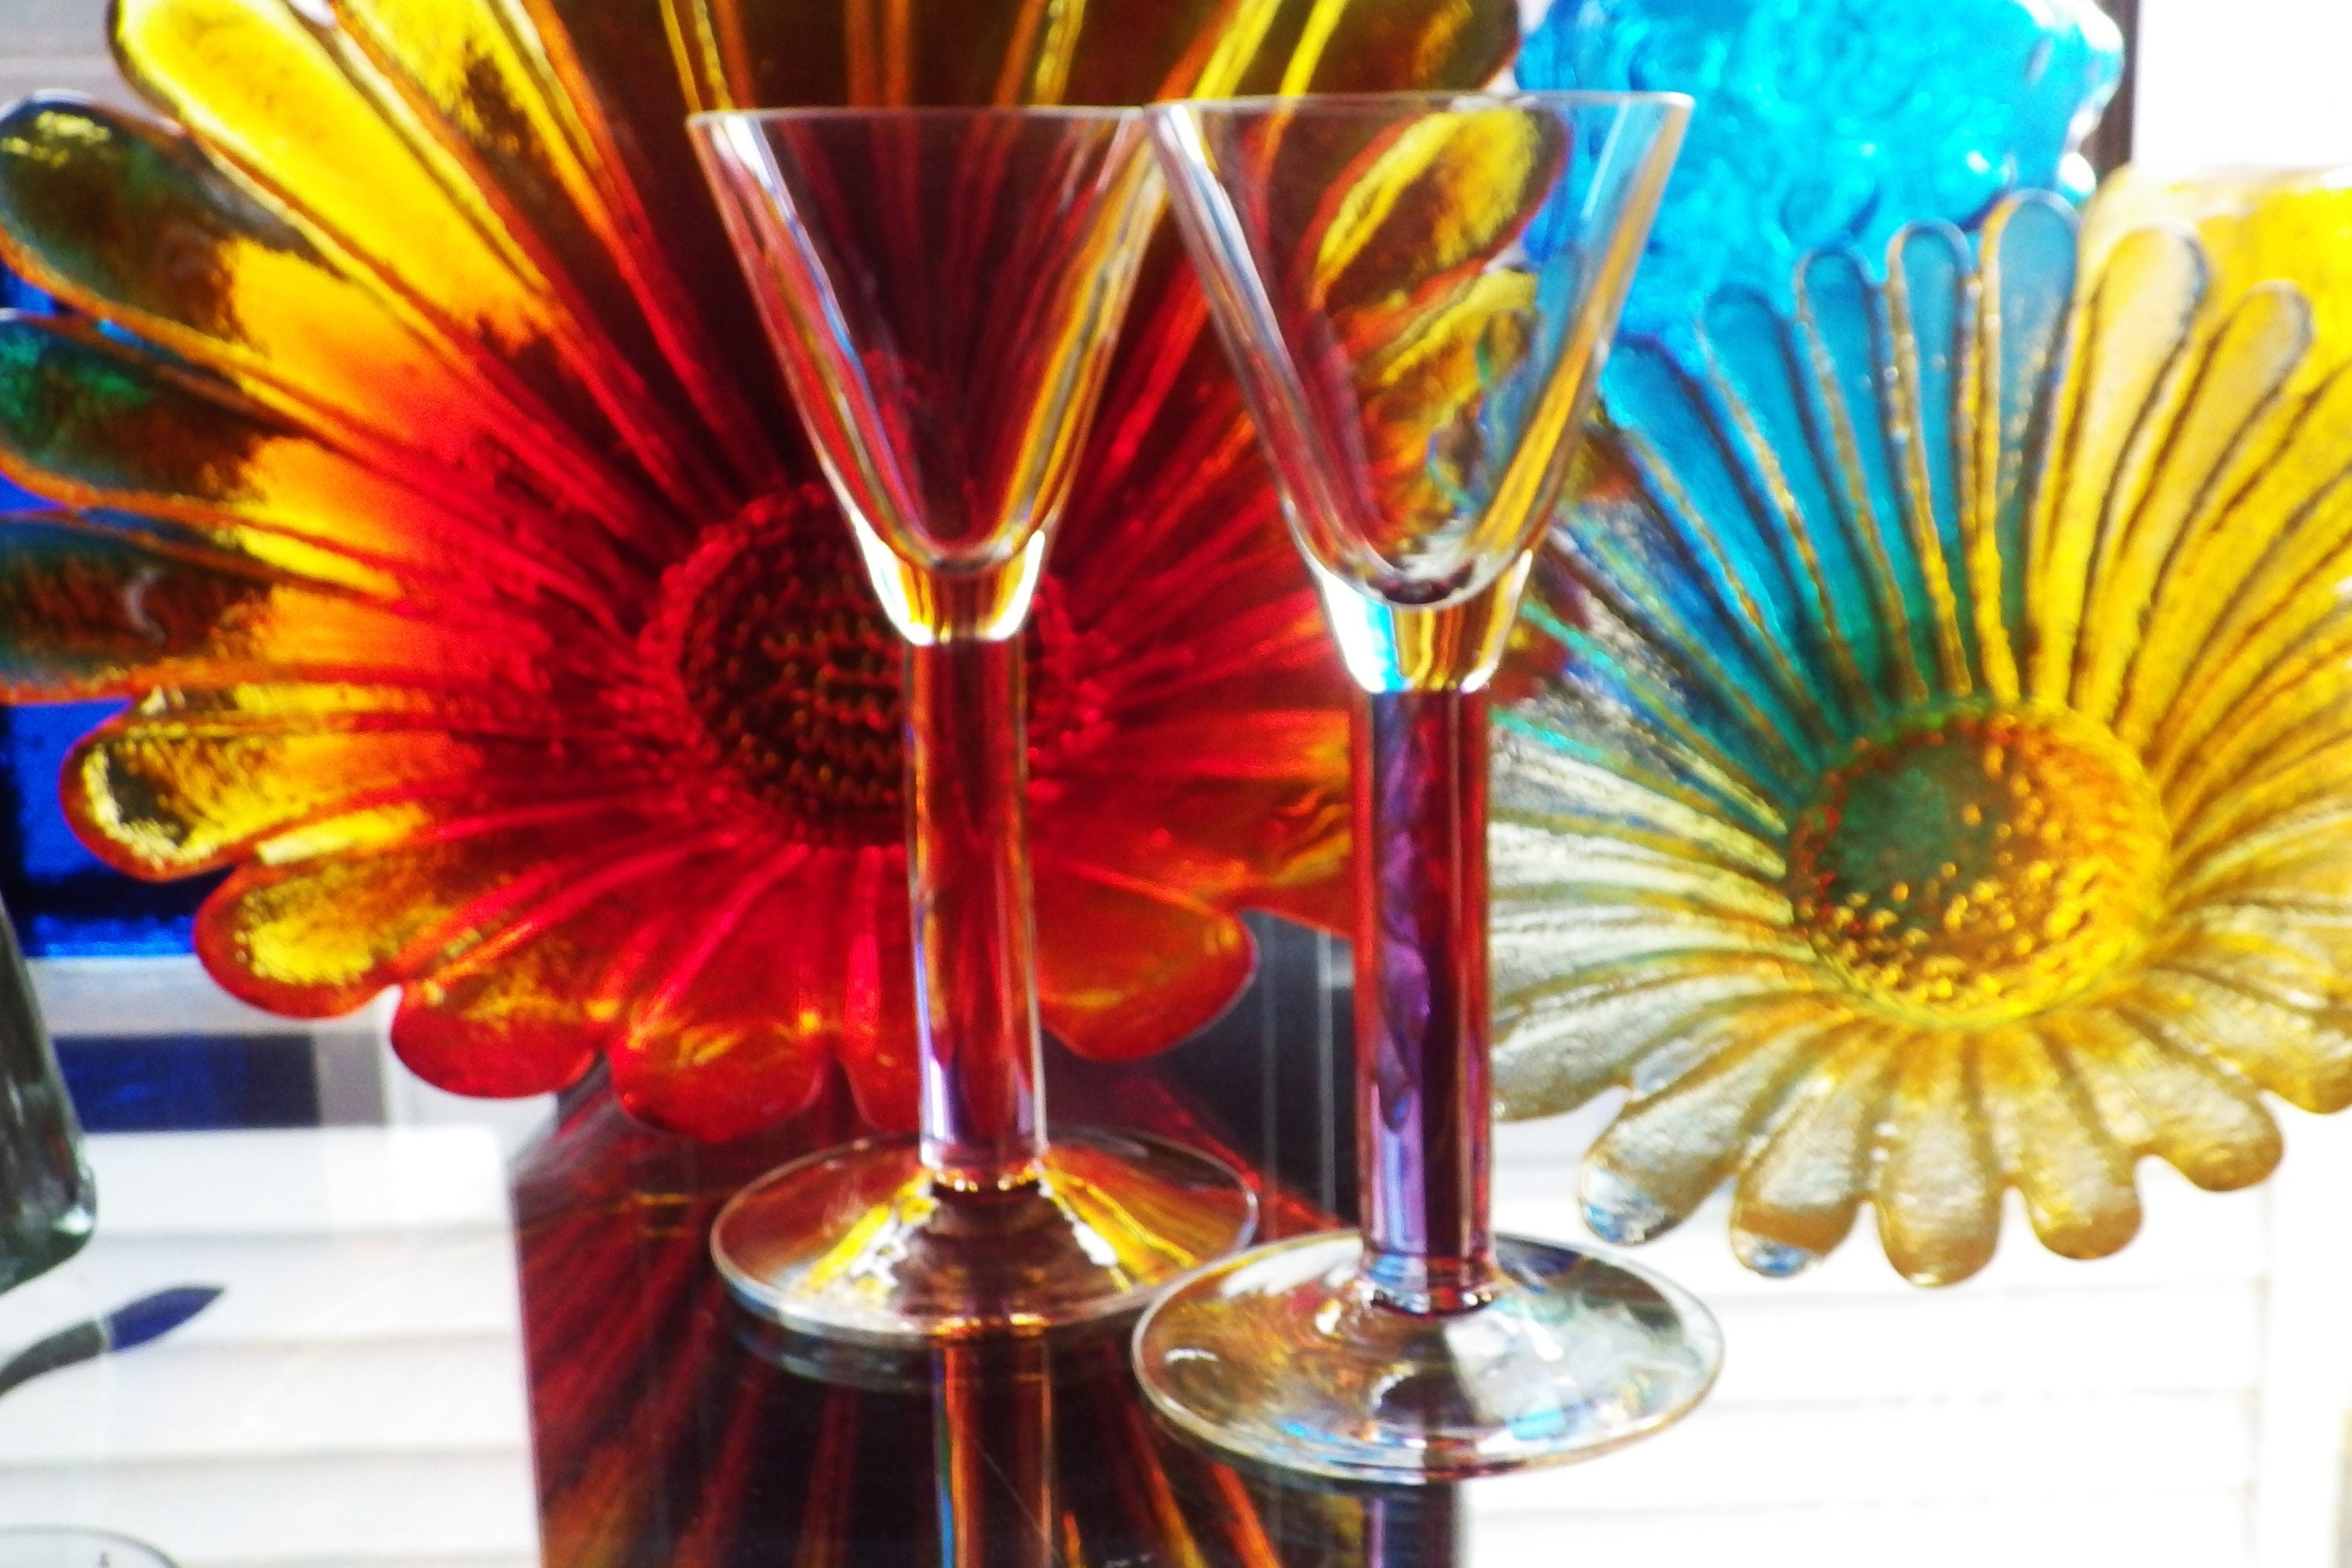 Sold at Auction: Stephen Smyers Art Glass Fluted Champagne Glasses